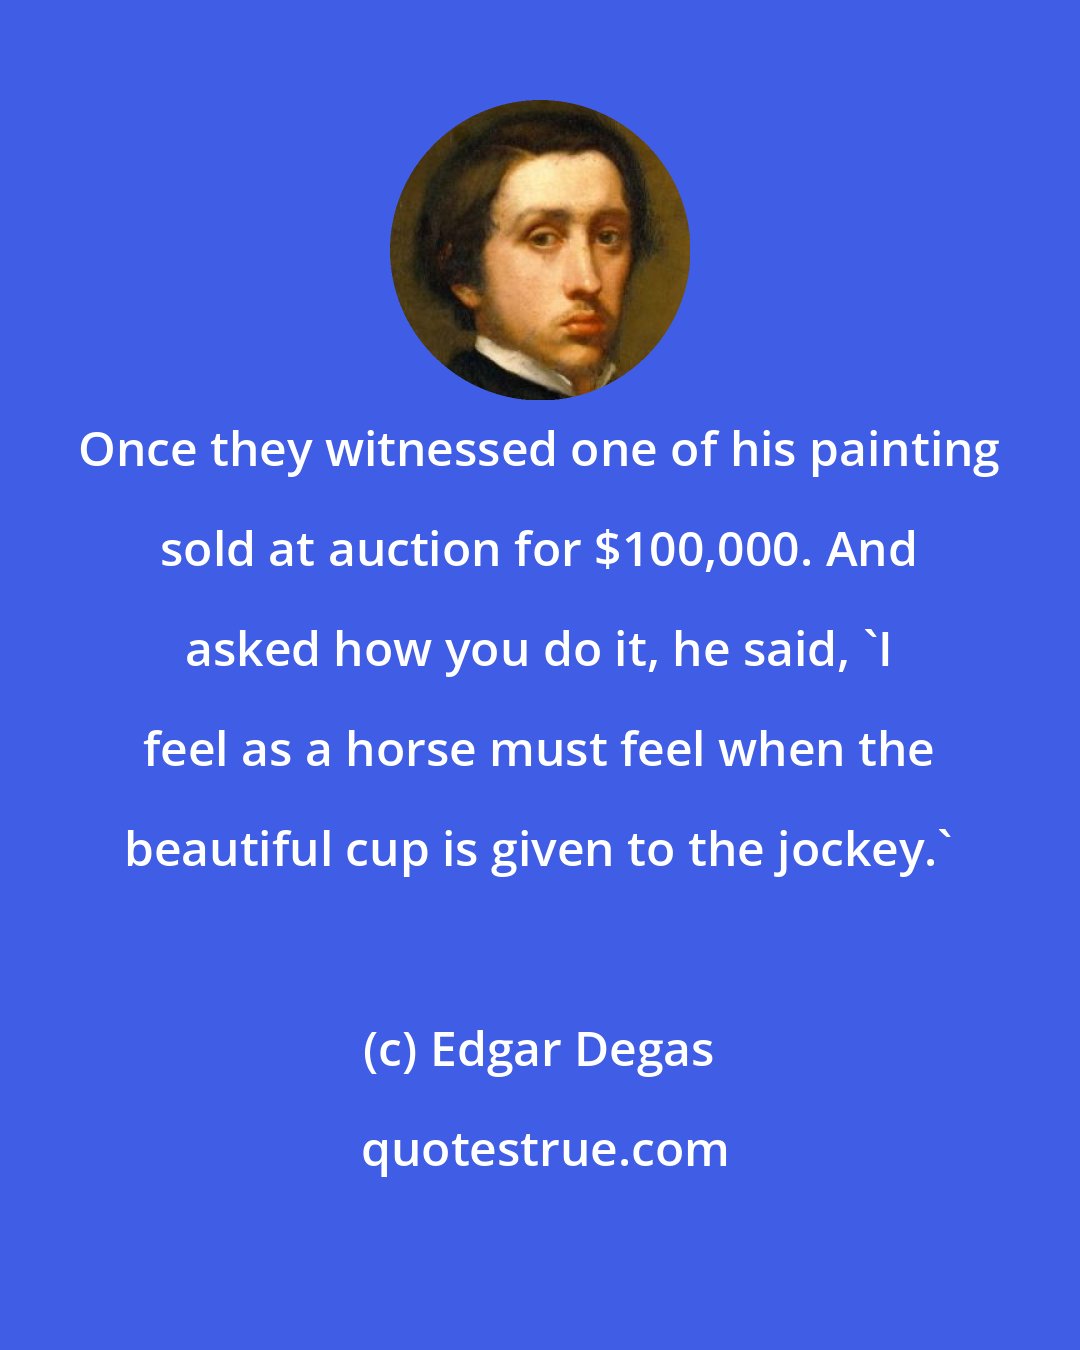 Edgar Degas: Once they witnessed one of his painting sold at auction for $100,000. And asked how you do it, he said, 'I feel as a horse must feel when the beautiful cup is given to the jockey.'